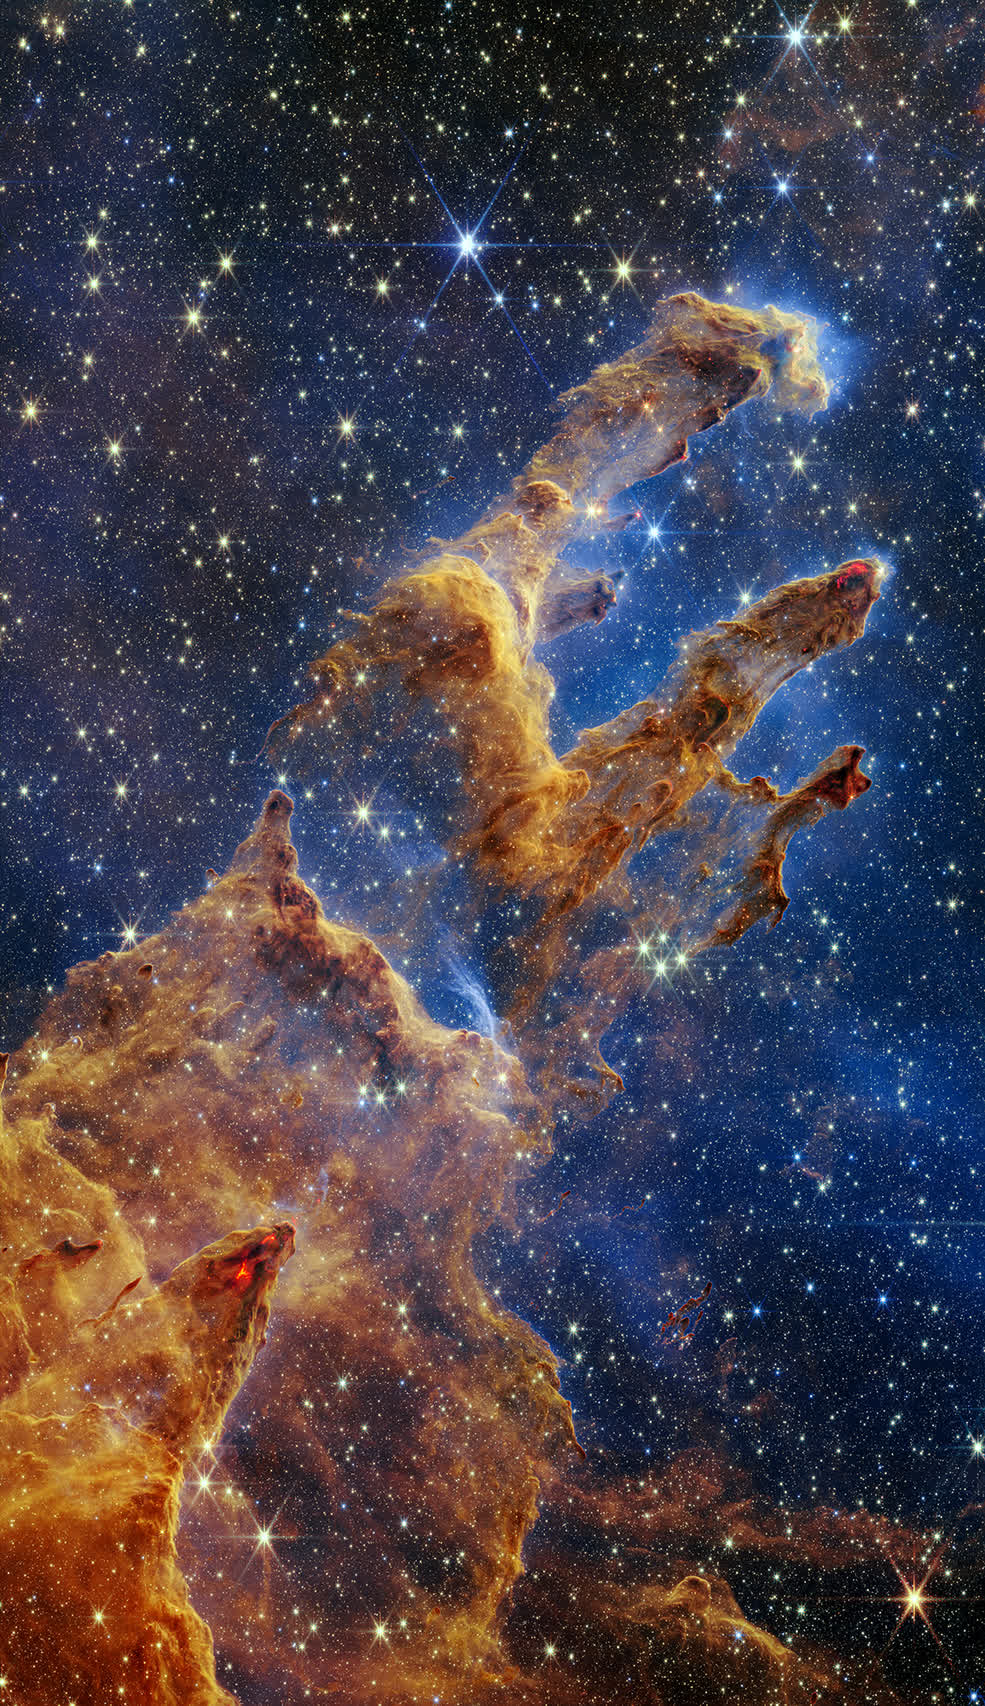 Webb's portrait of the Pillars of Creation is a star-filled delight